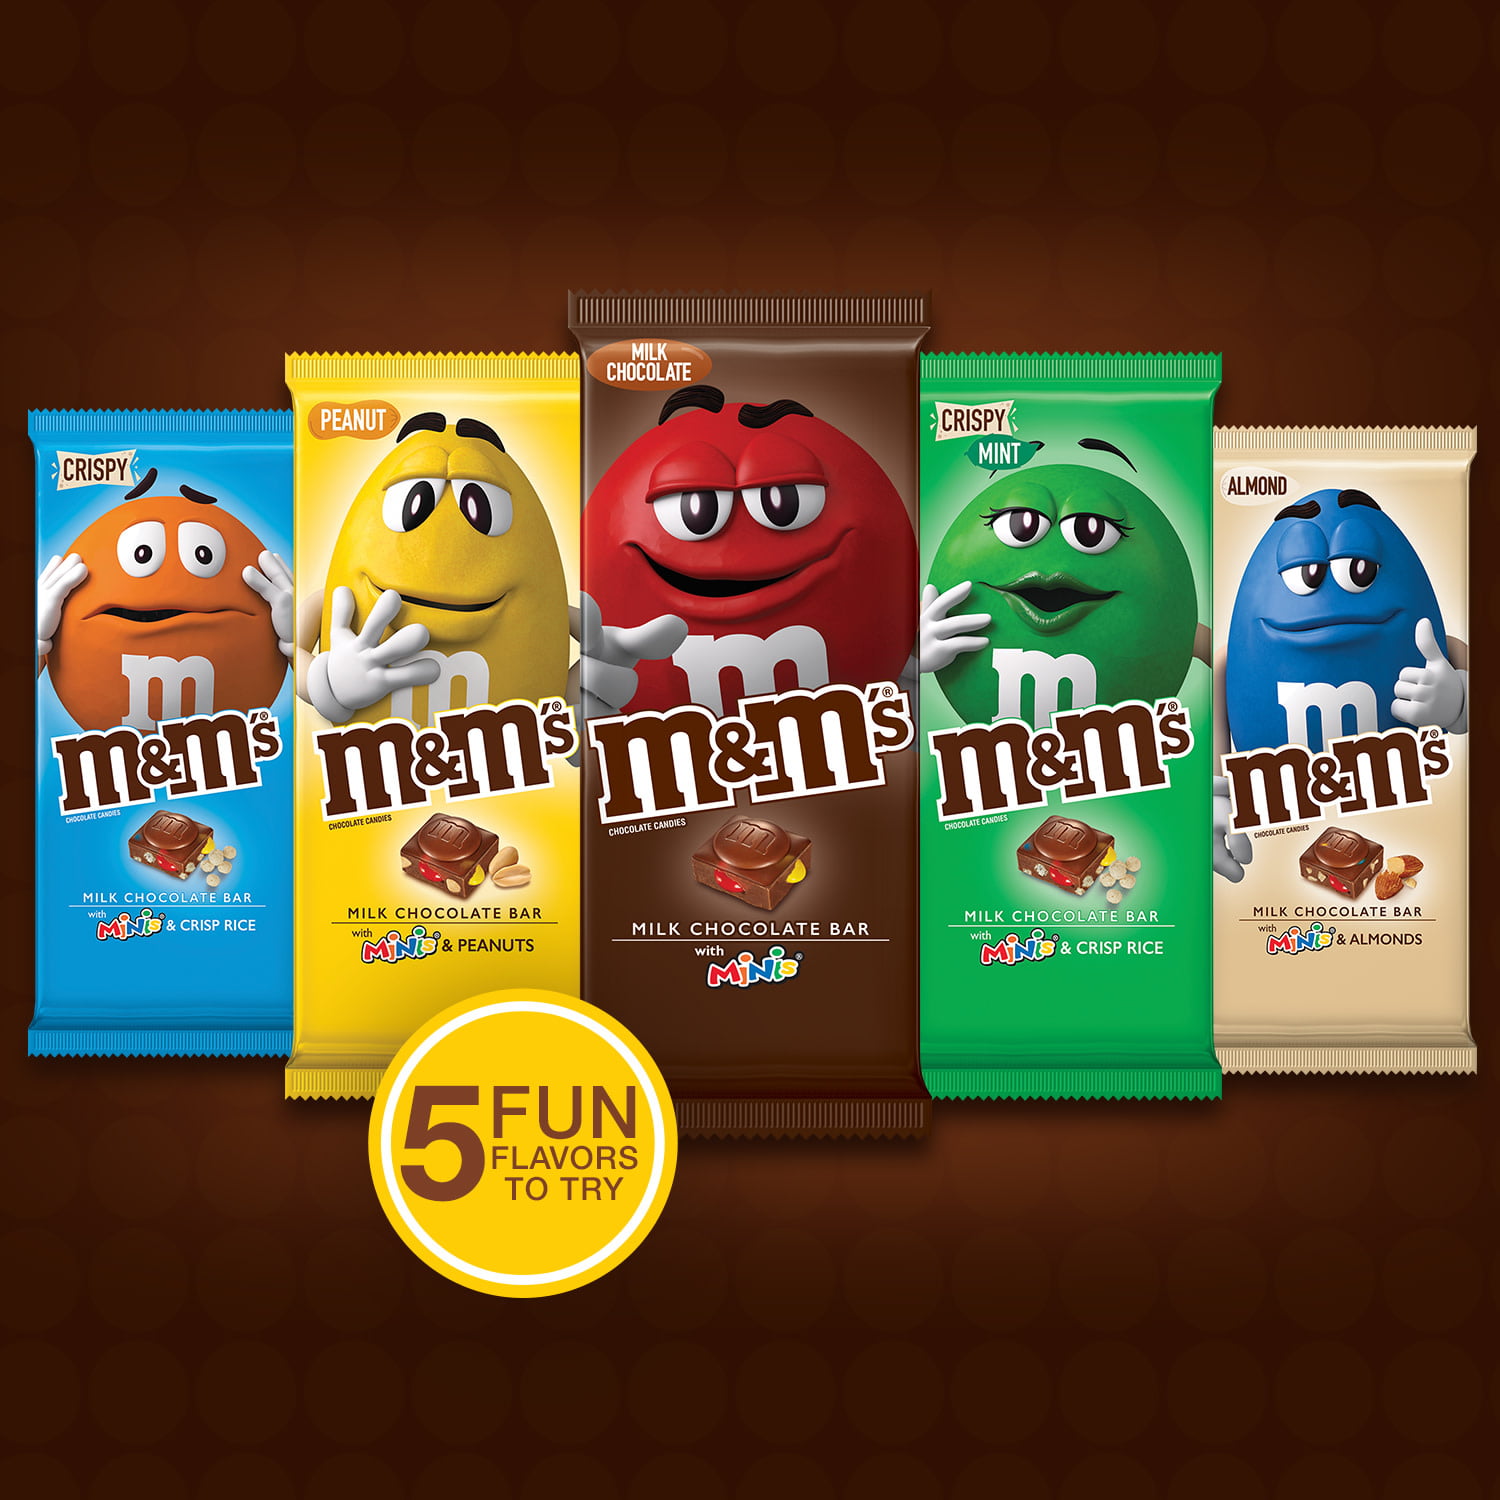 M&M's® Dark Chocolate Bar with Minis, 4 oz - Dillons Food Stores